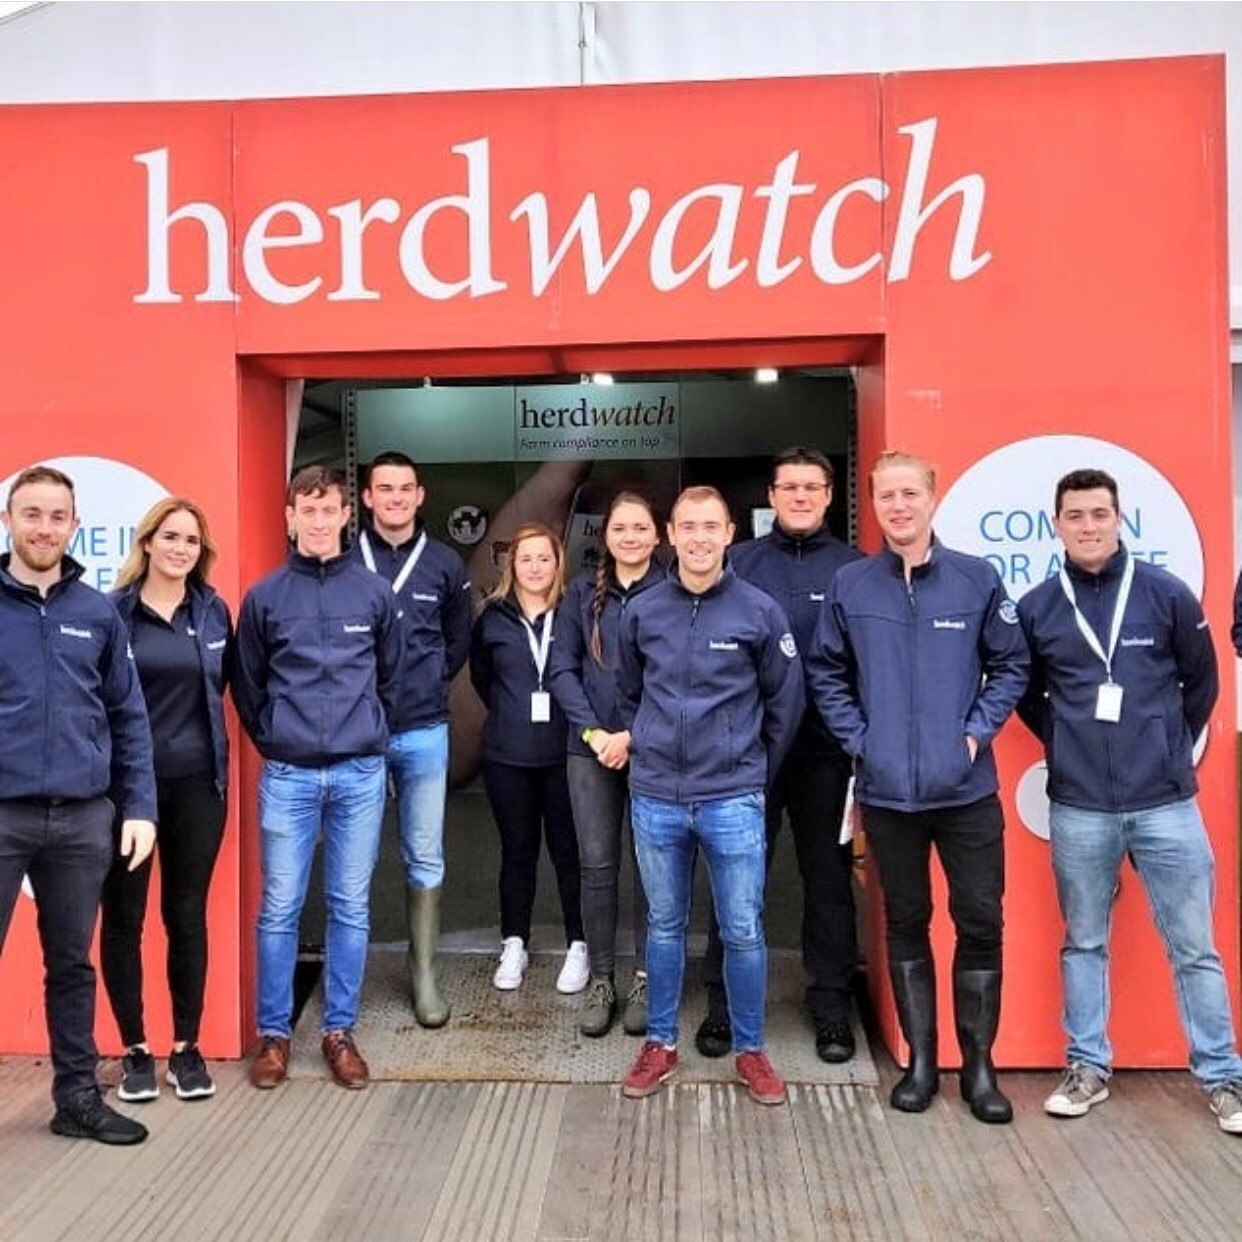 Herdwatch team ploughing old logo